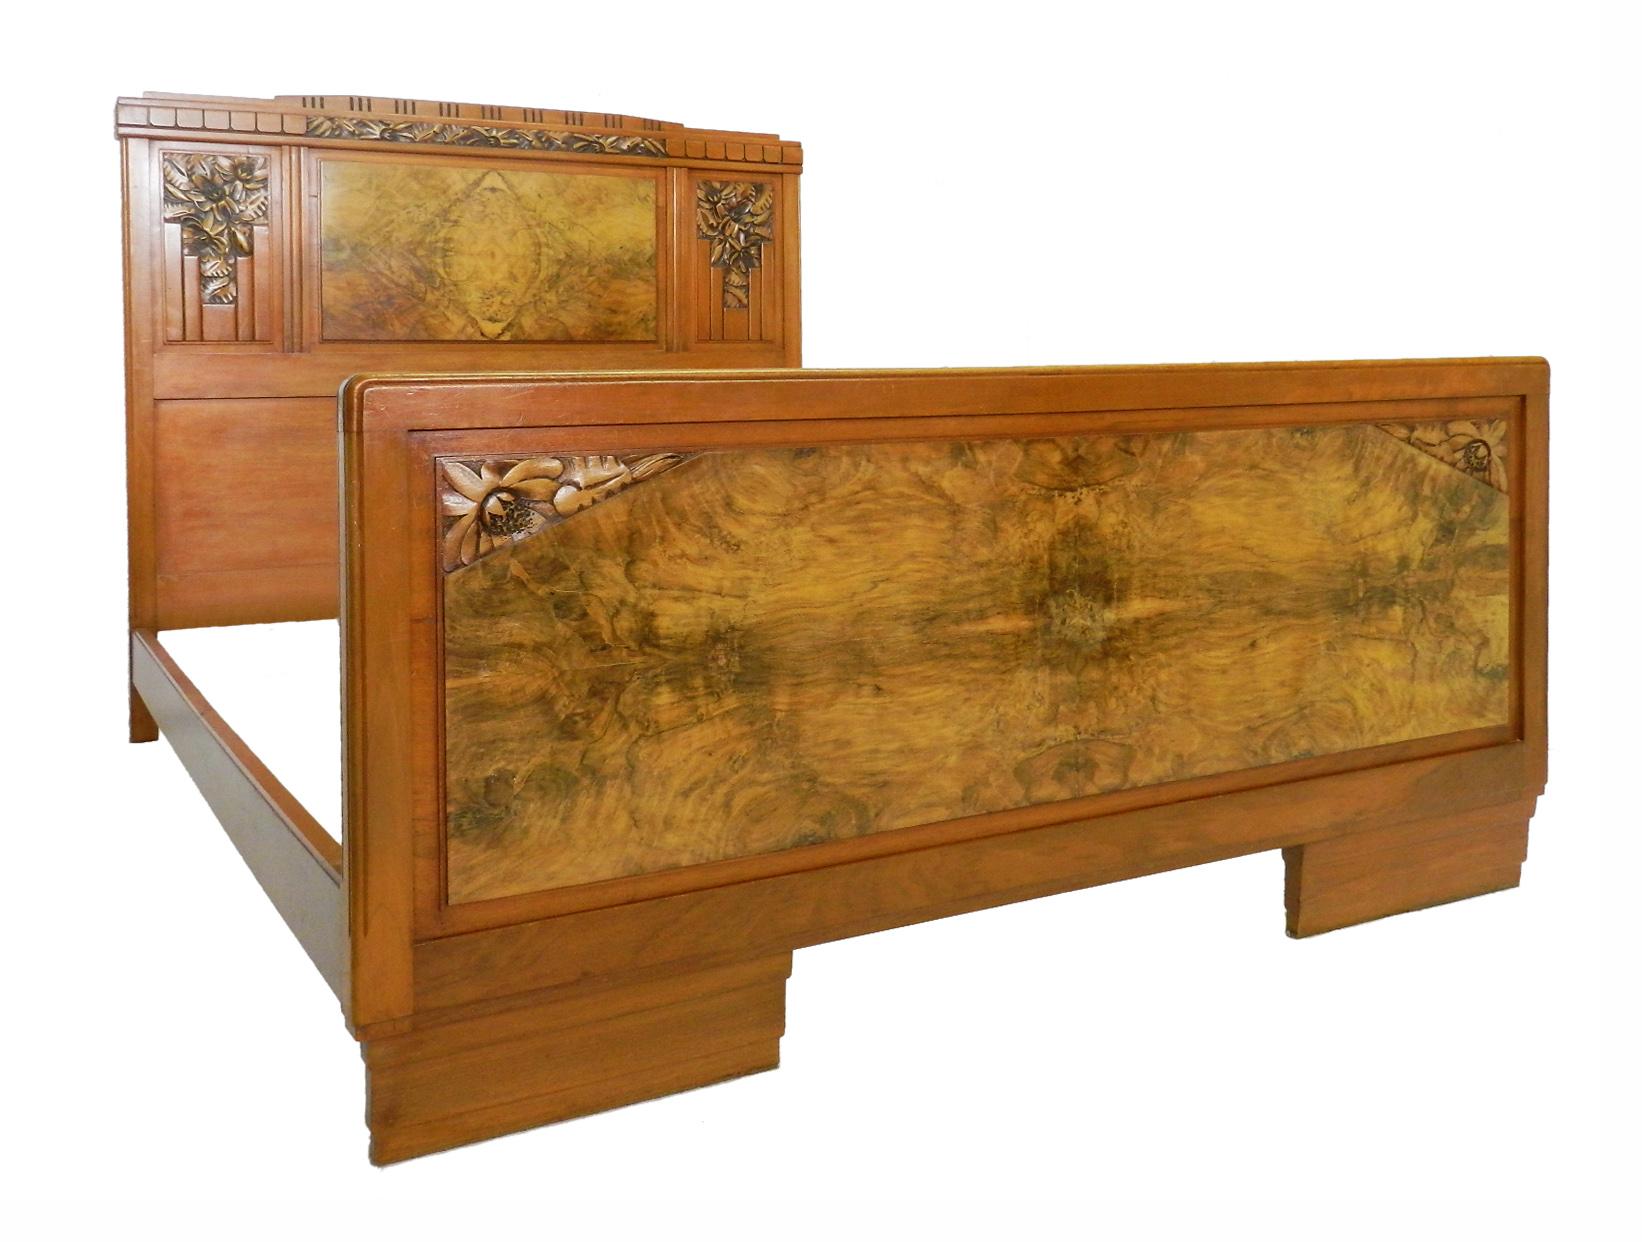 French Art Deco bed walnut antique circa 1930
Stunning burr walnut insets
Attributed to Sue et Mare their pieces were mostly unmarked and the quality of this is in keeping with all their original work
The bed will dismantle for shipping and placing